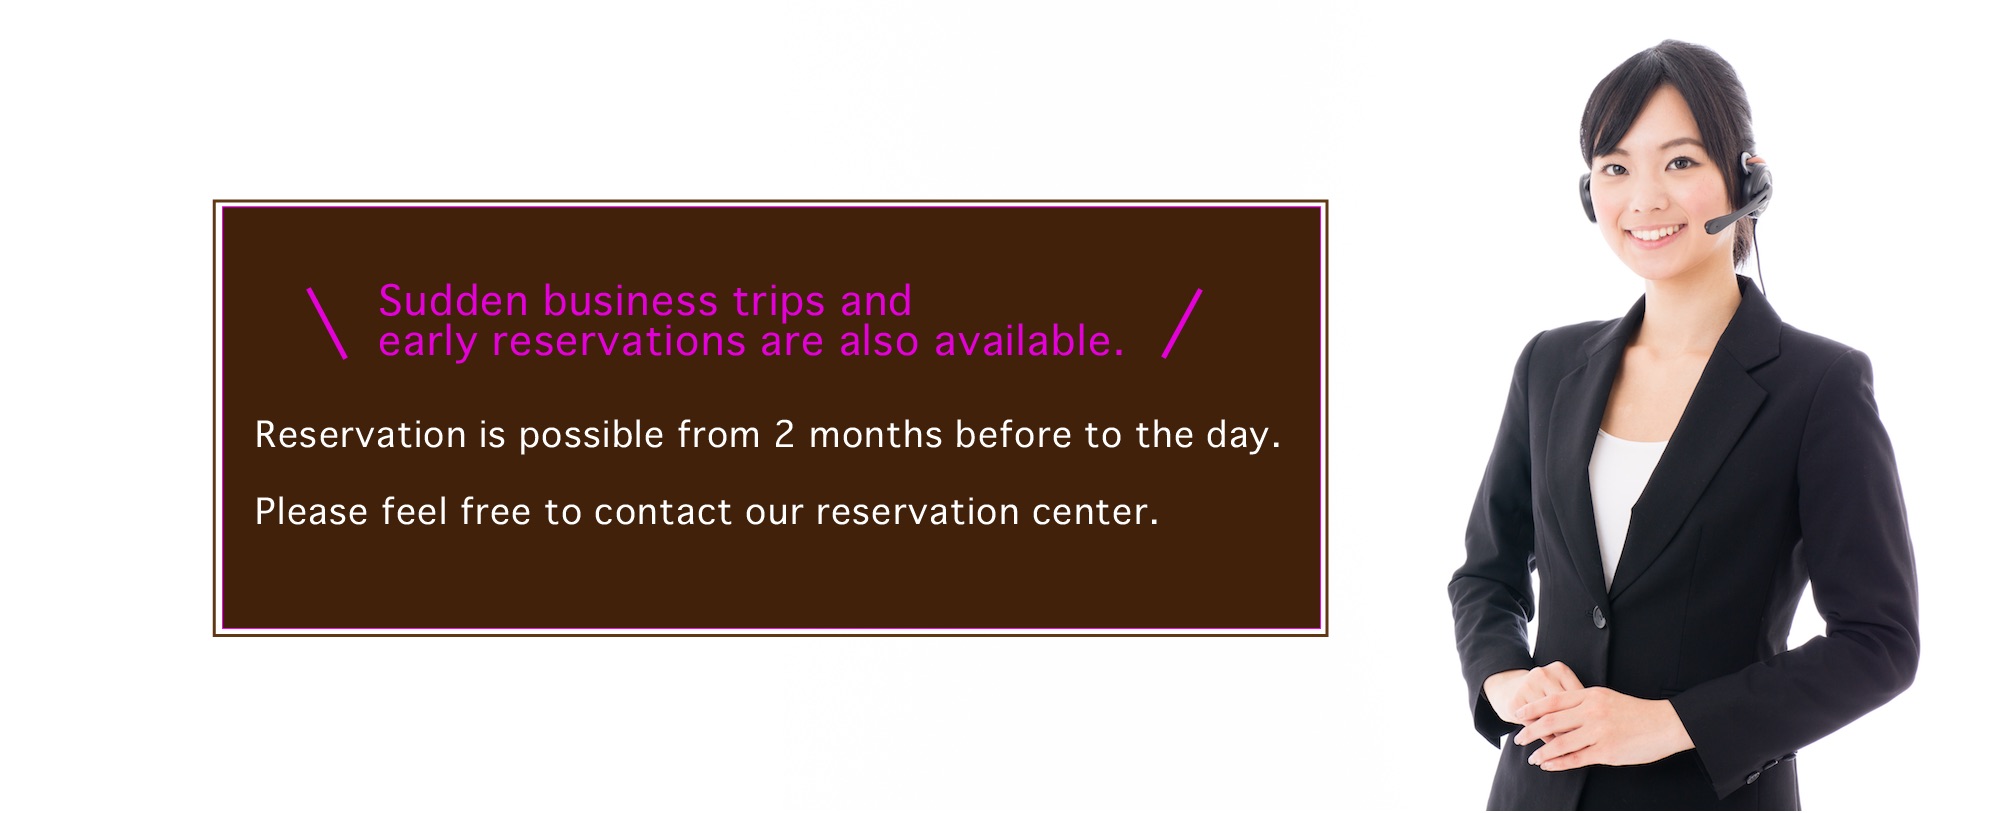 Sudden business trips and early reservation are also available.